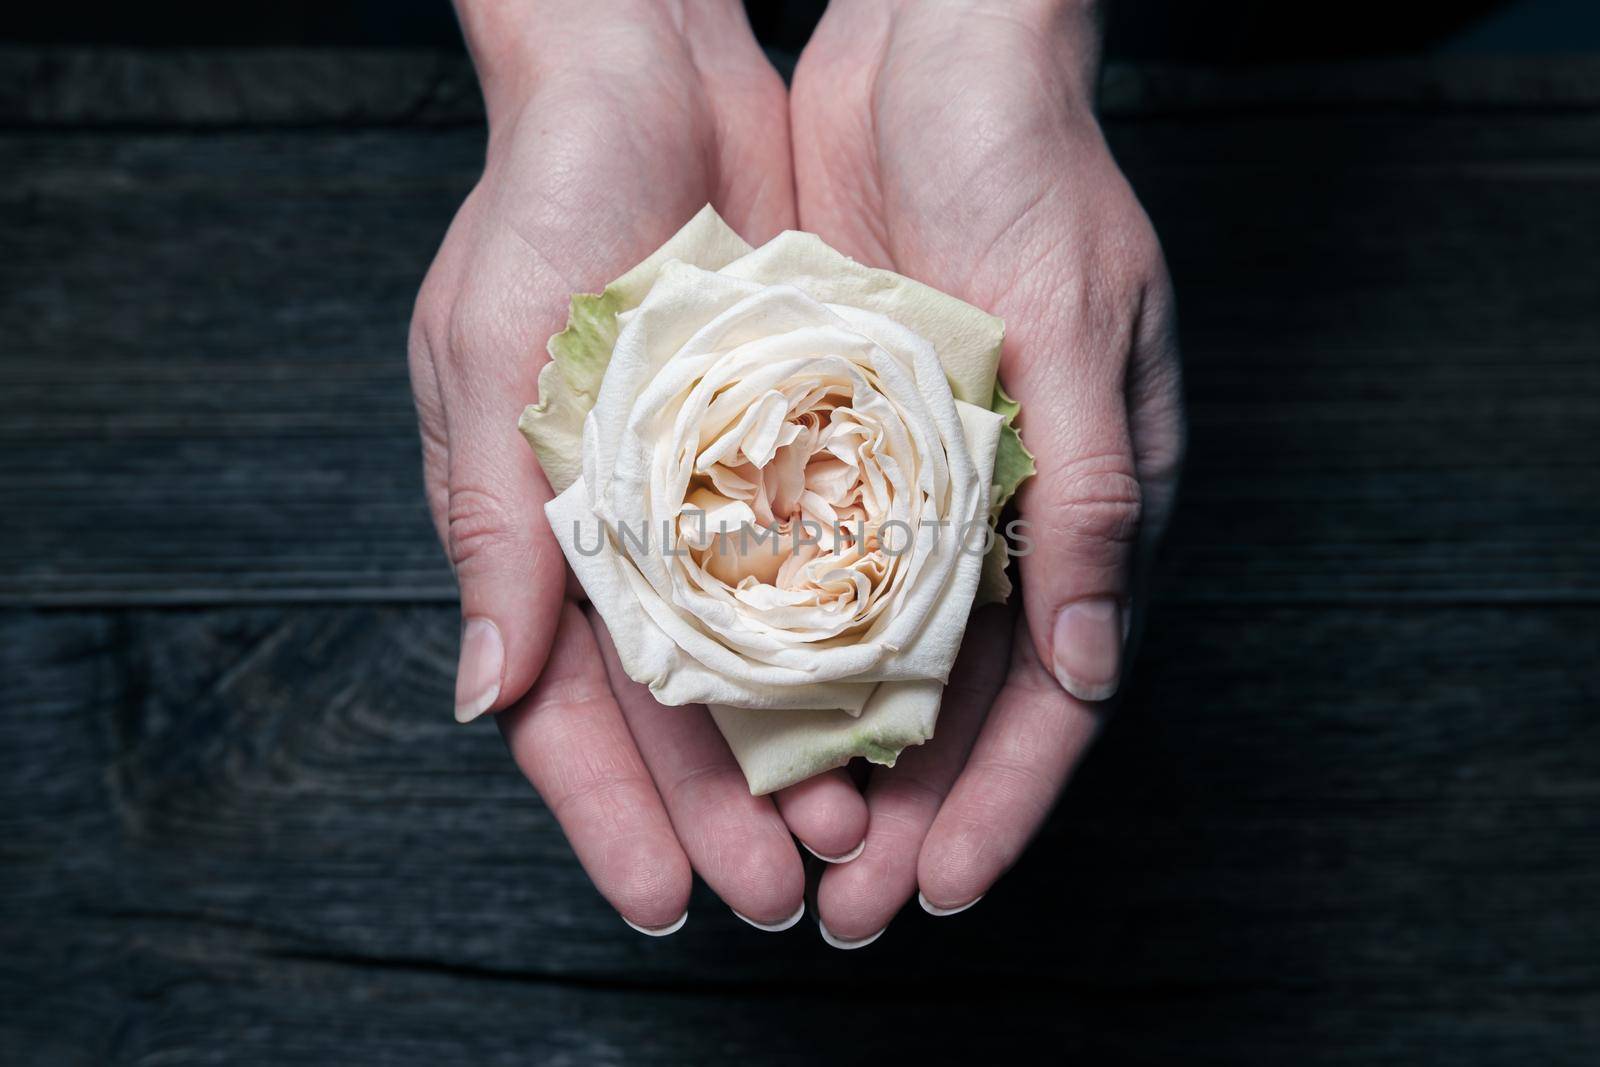 Women's hands hold a white rose bud by vollirikan